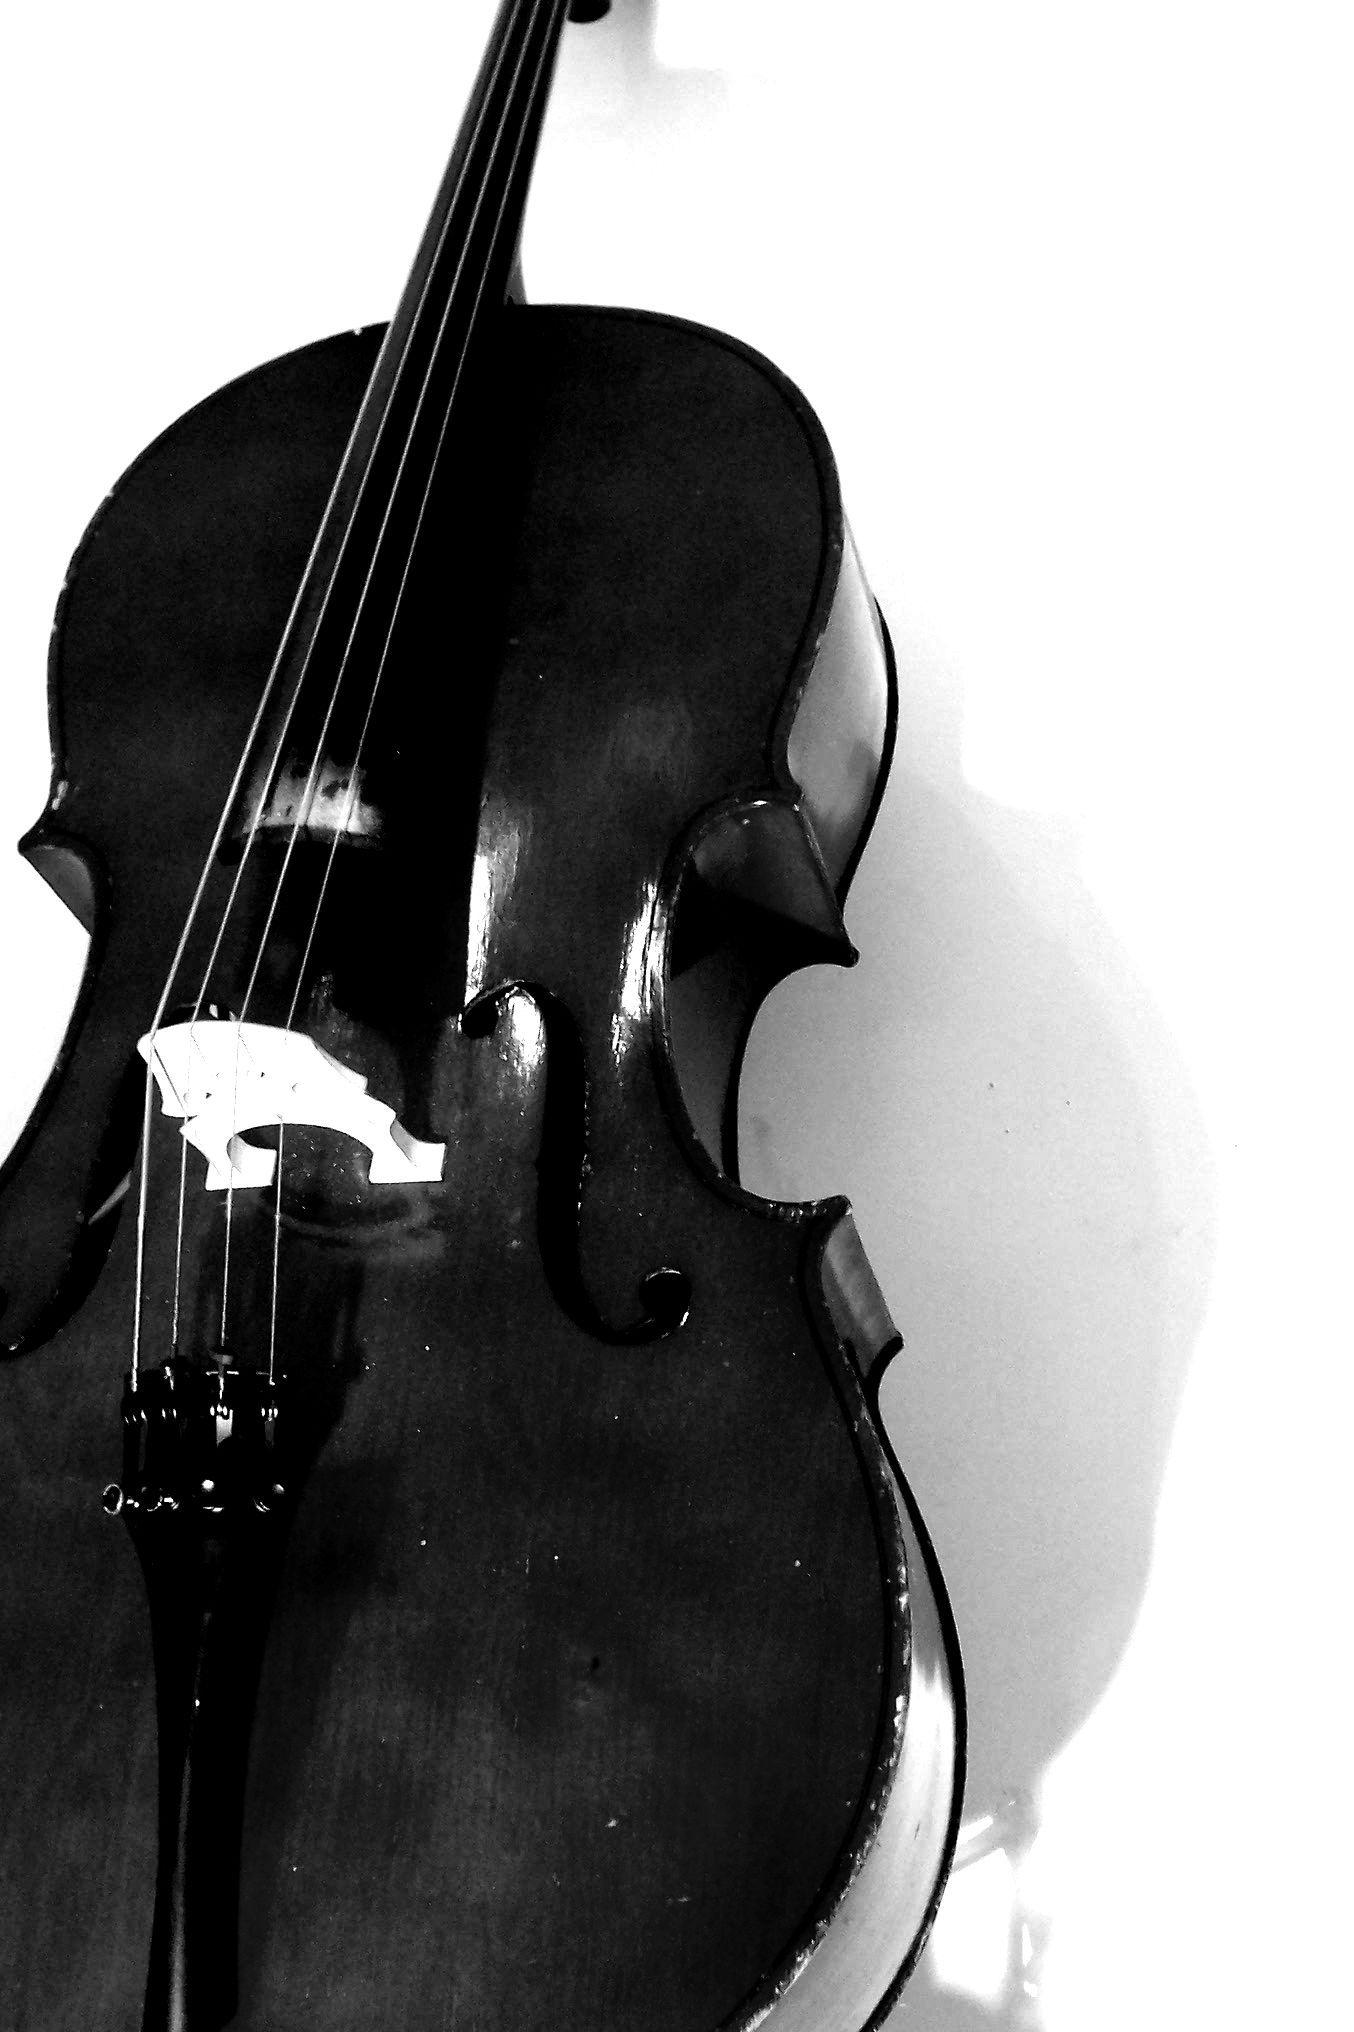 image For > Black And White Cello Wallpaper. Soft in 2018